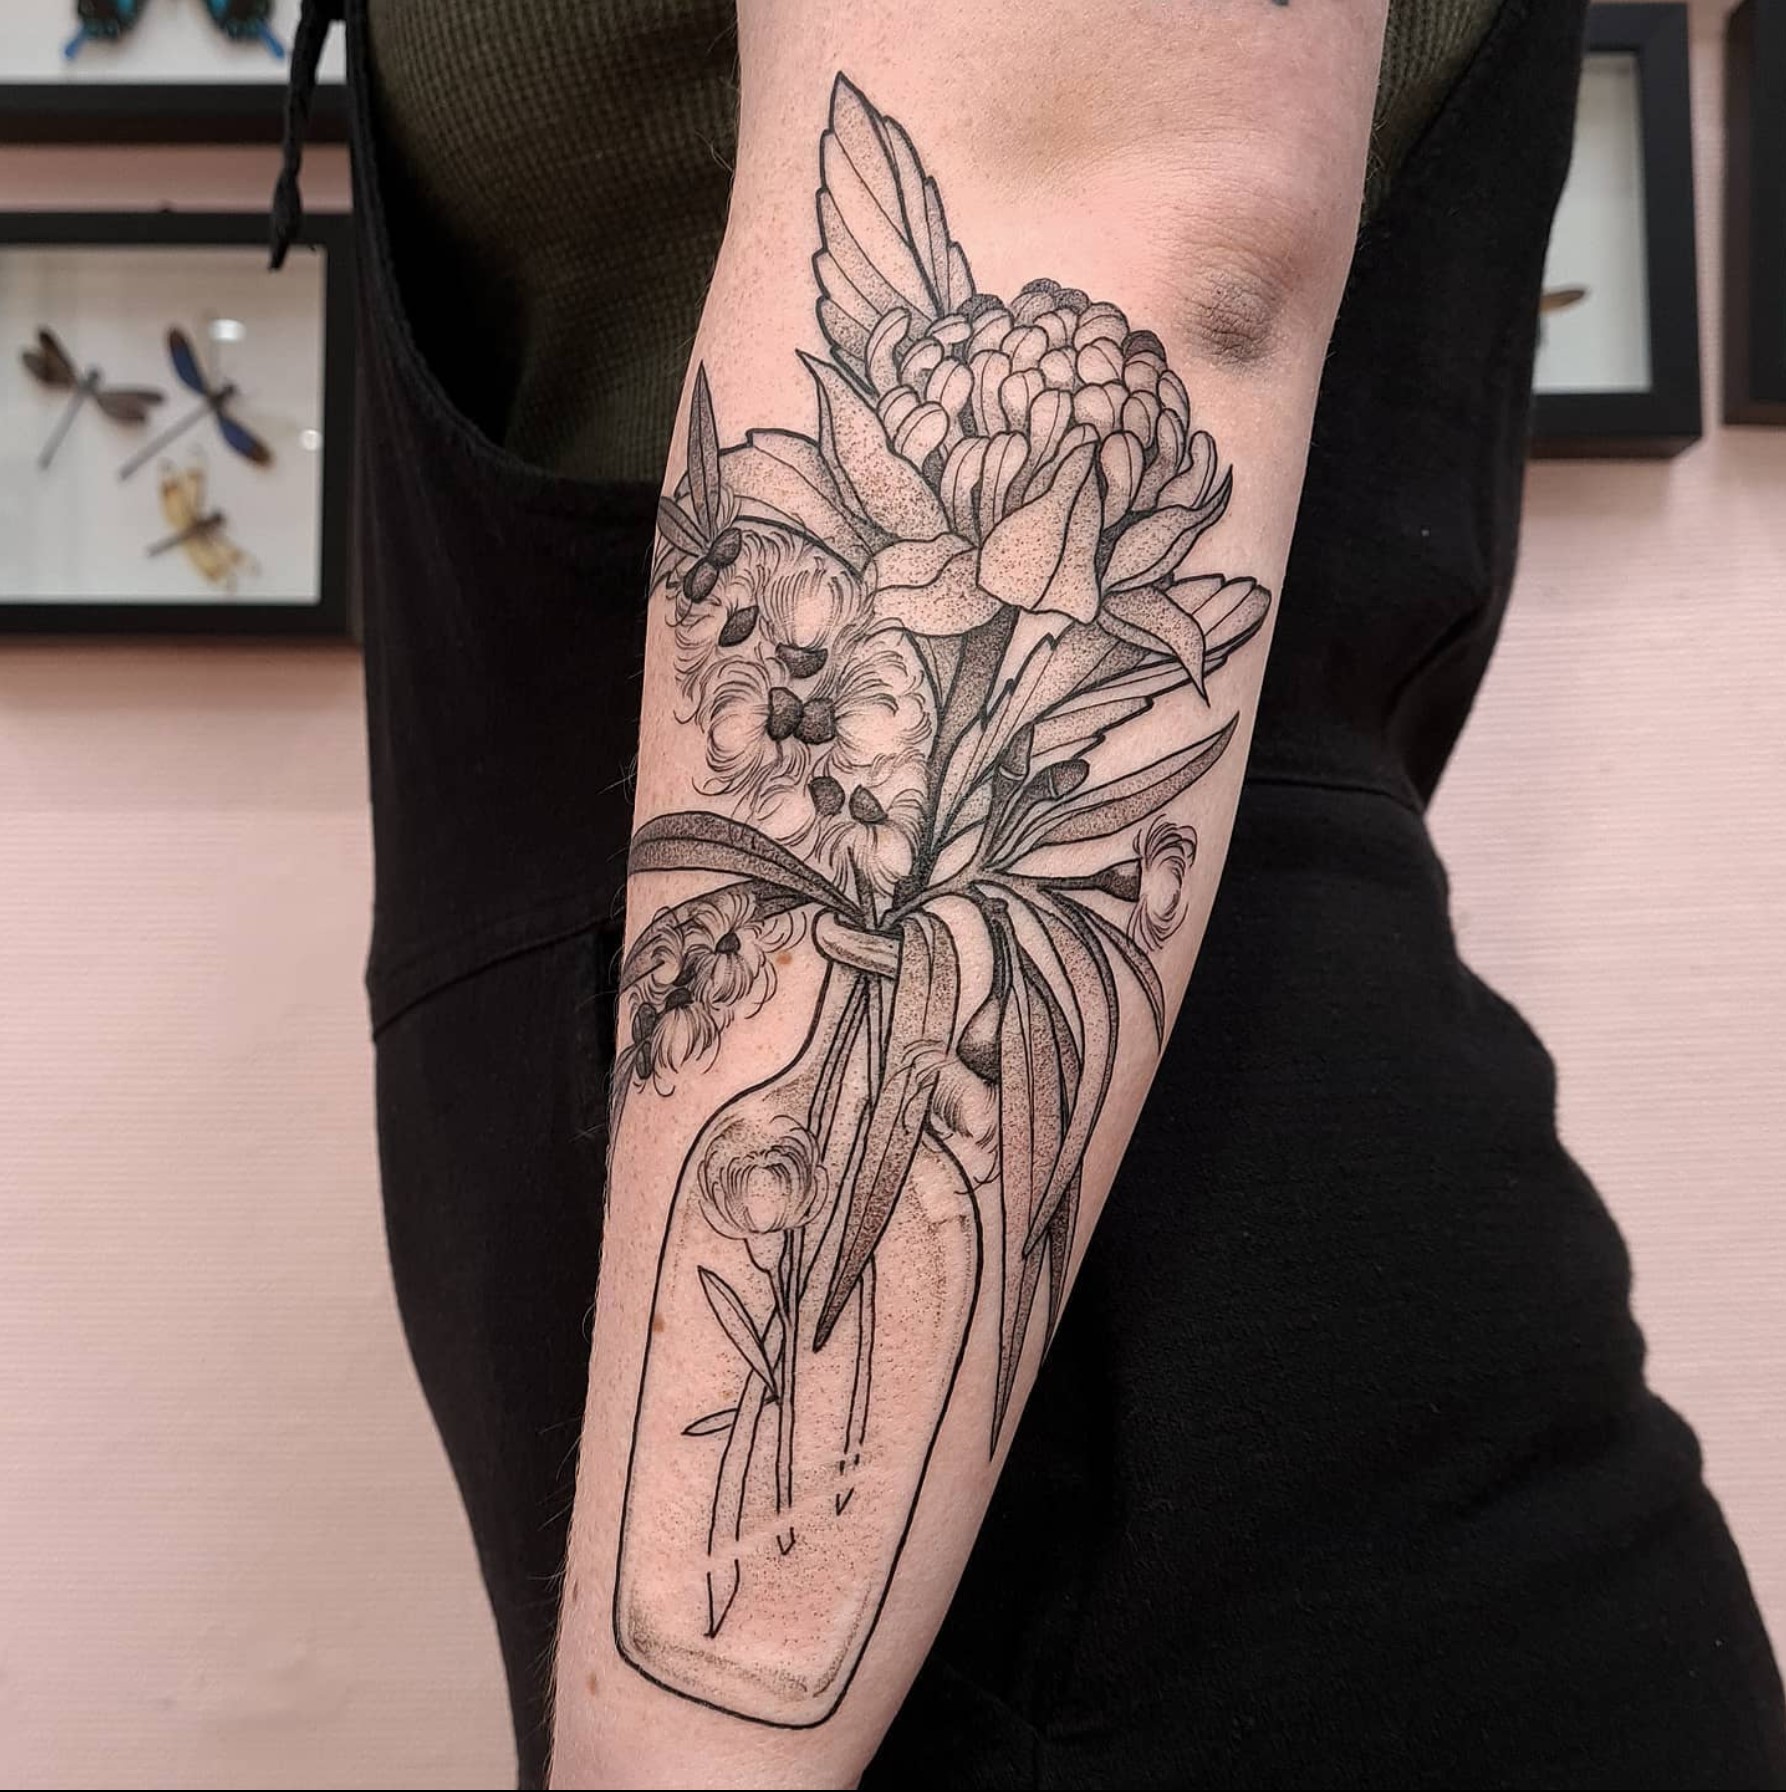 Florals in a vase tattoo